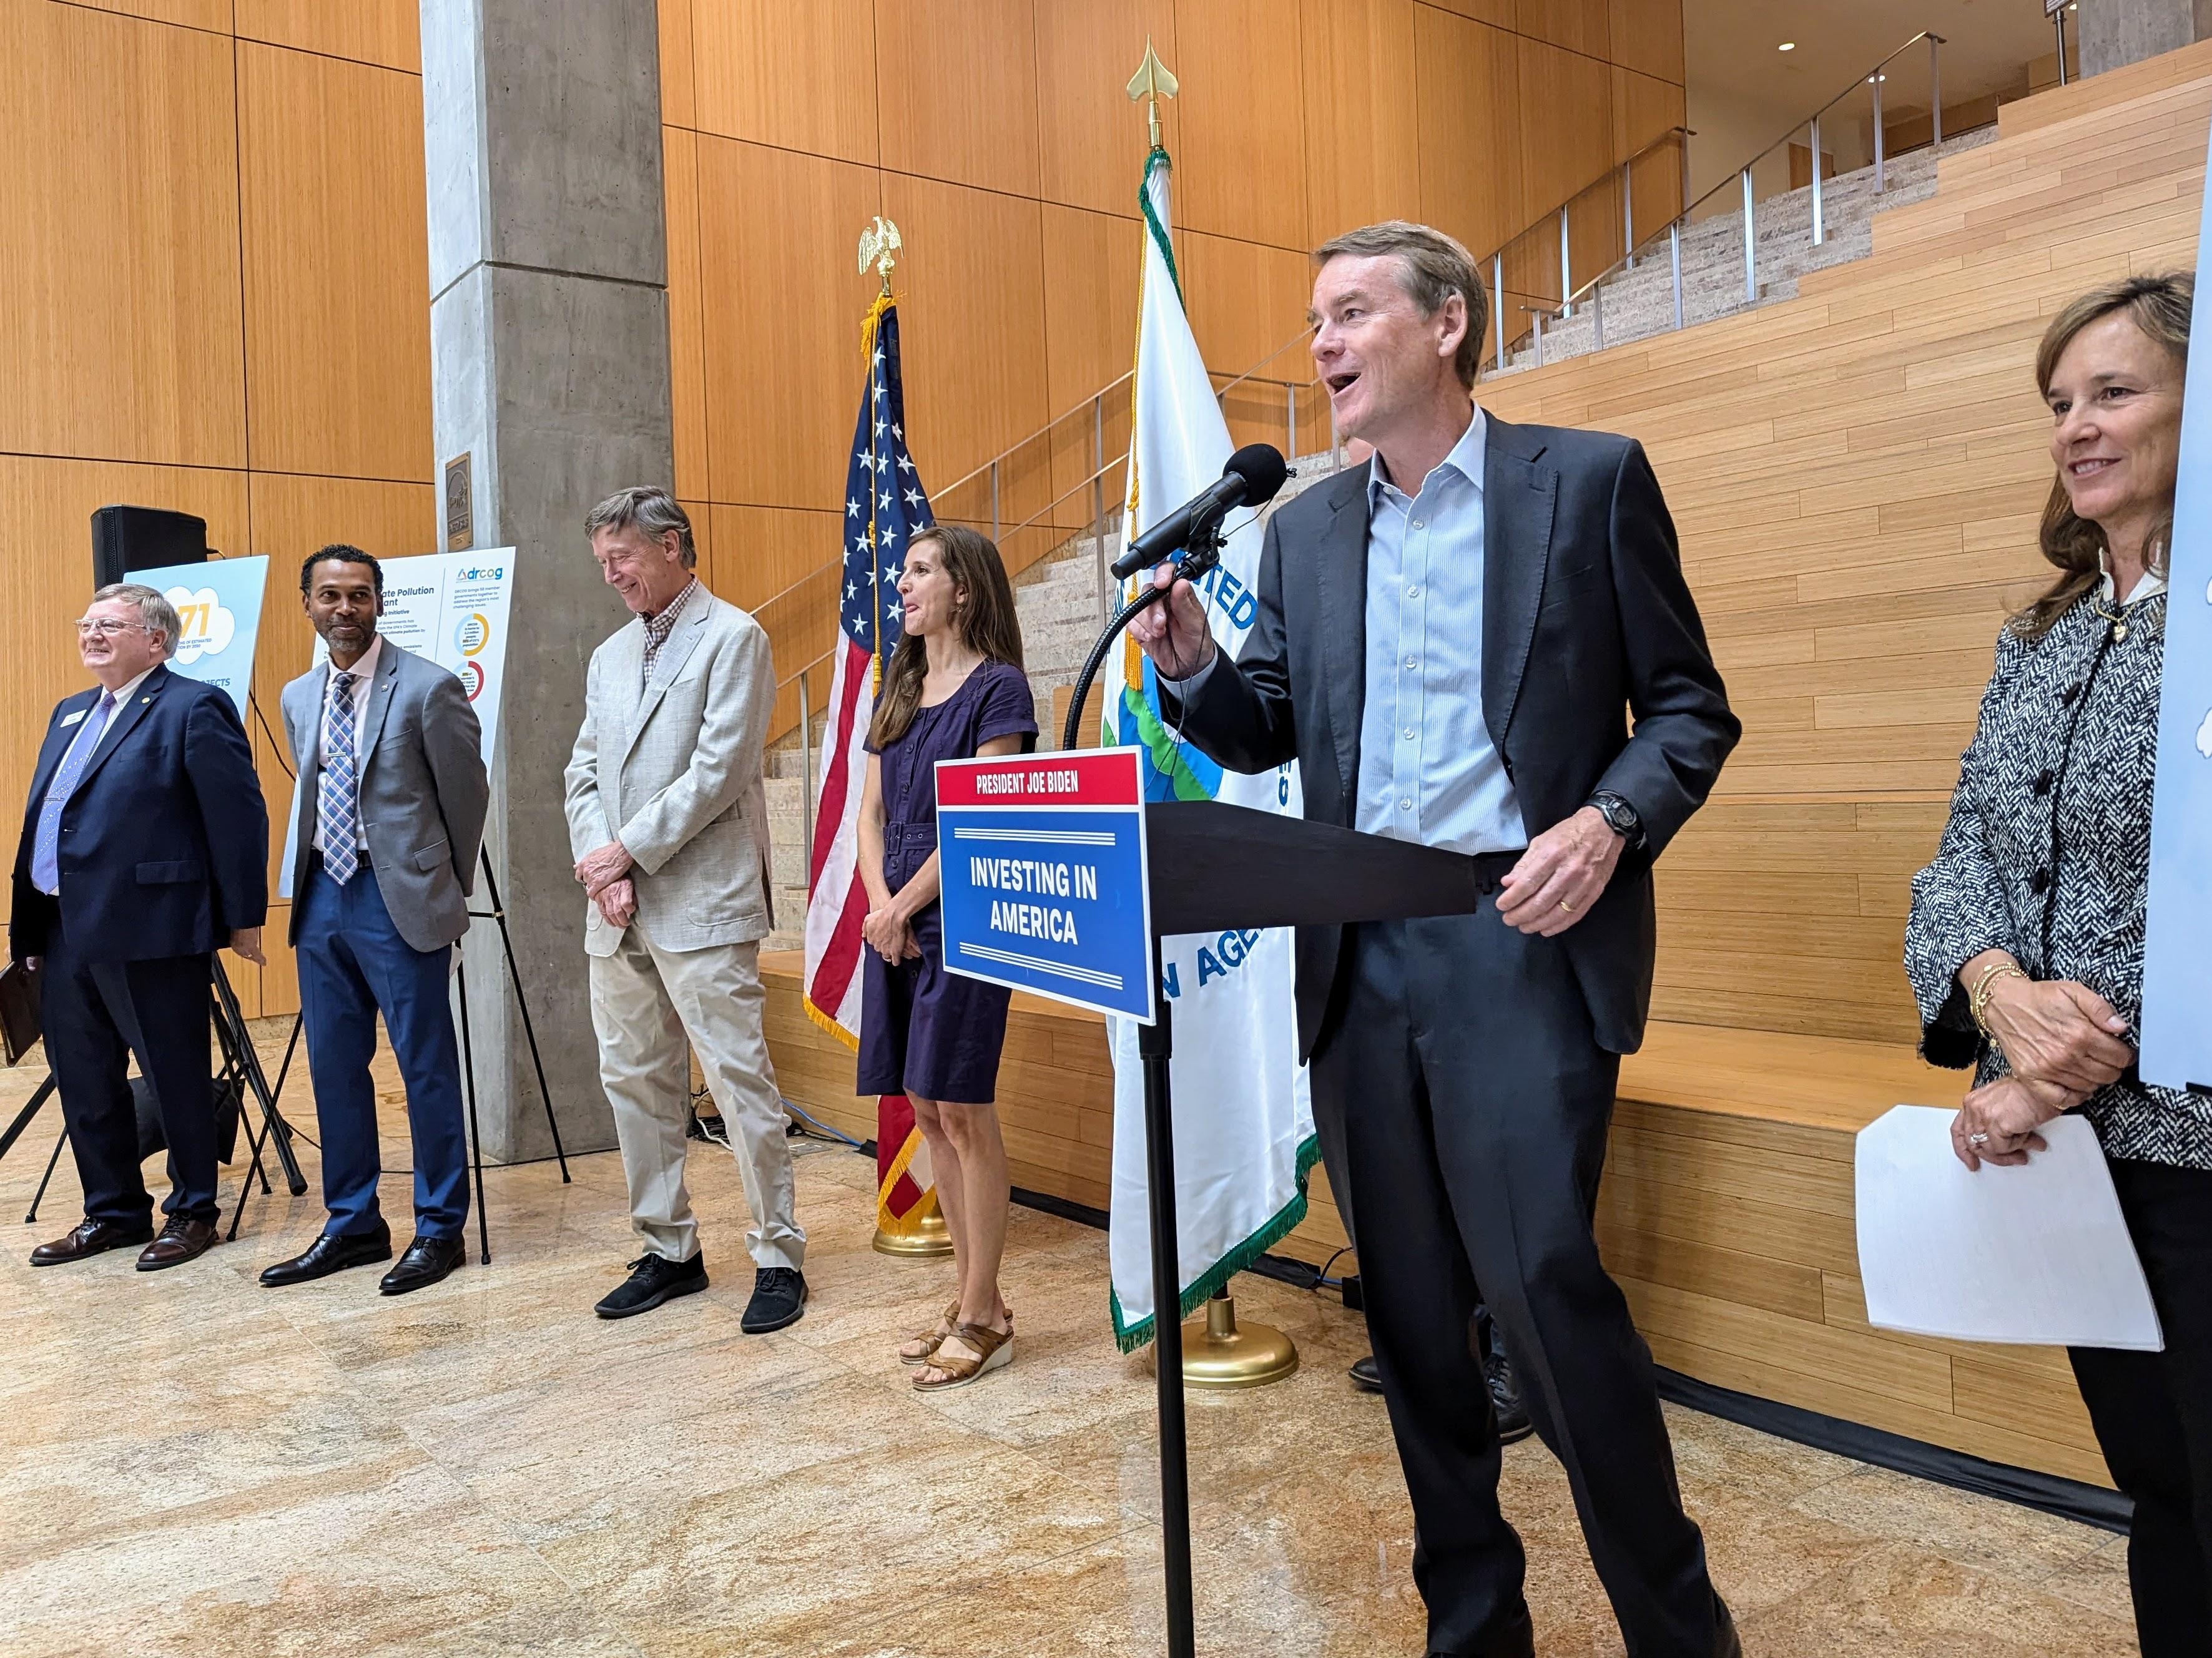 Six people stand in front of a series of stairs with two flags behind them on poles. One person, Michael Bennet, stands at a podium speaking into a microphone.